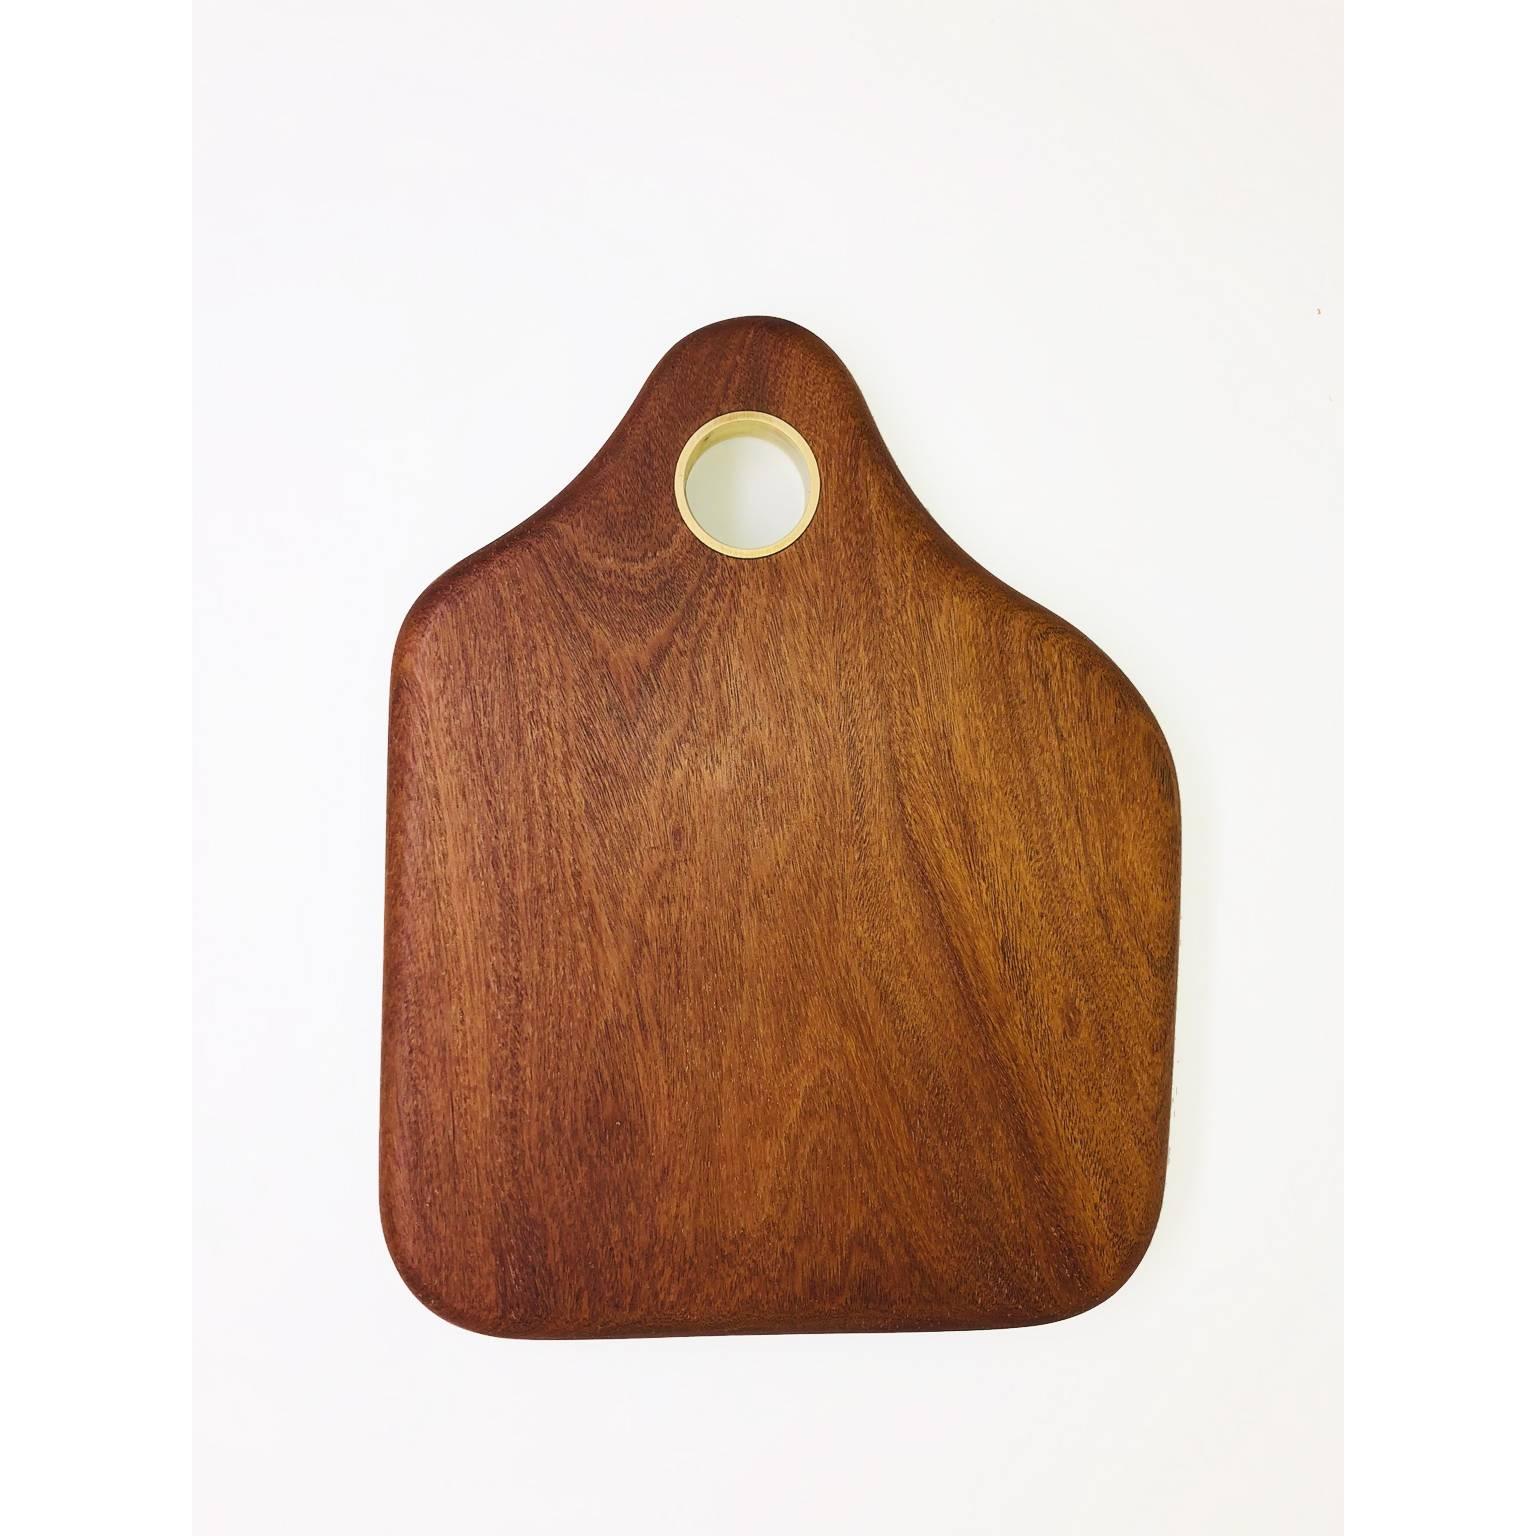 The cutting gourmet board is made in Brazilian solid wood Cumaru with brass insert. Finishing in mineral oil suitable for food.
To maintain the cutting gourmet board after use, wash in cold water with a neutral soap. Leave in an open surface to